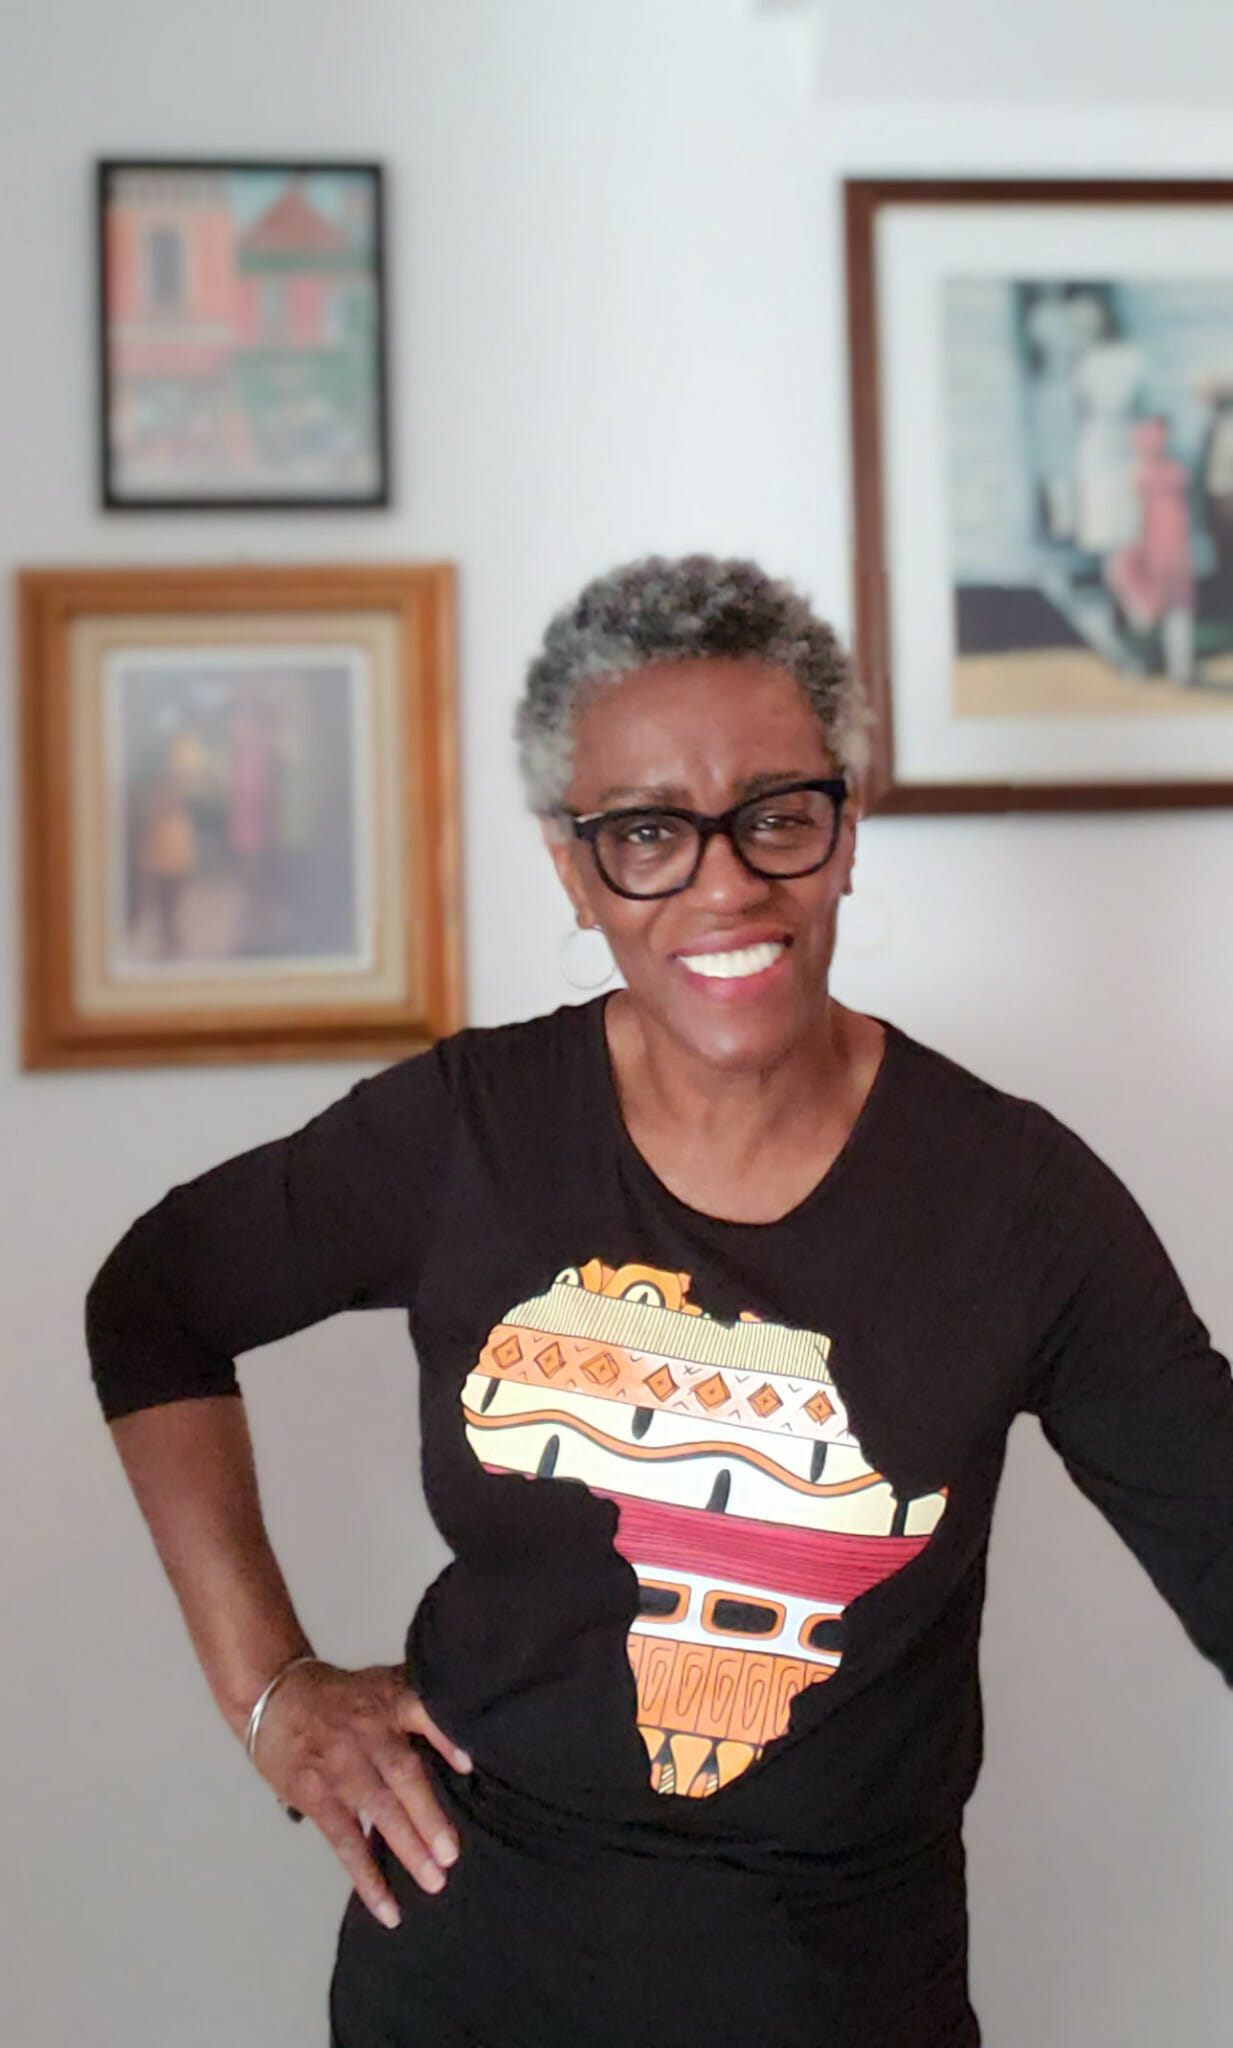 black woman smiling wearing a black shirt with africa image in the front